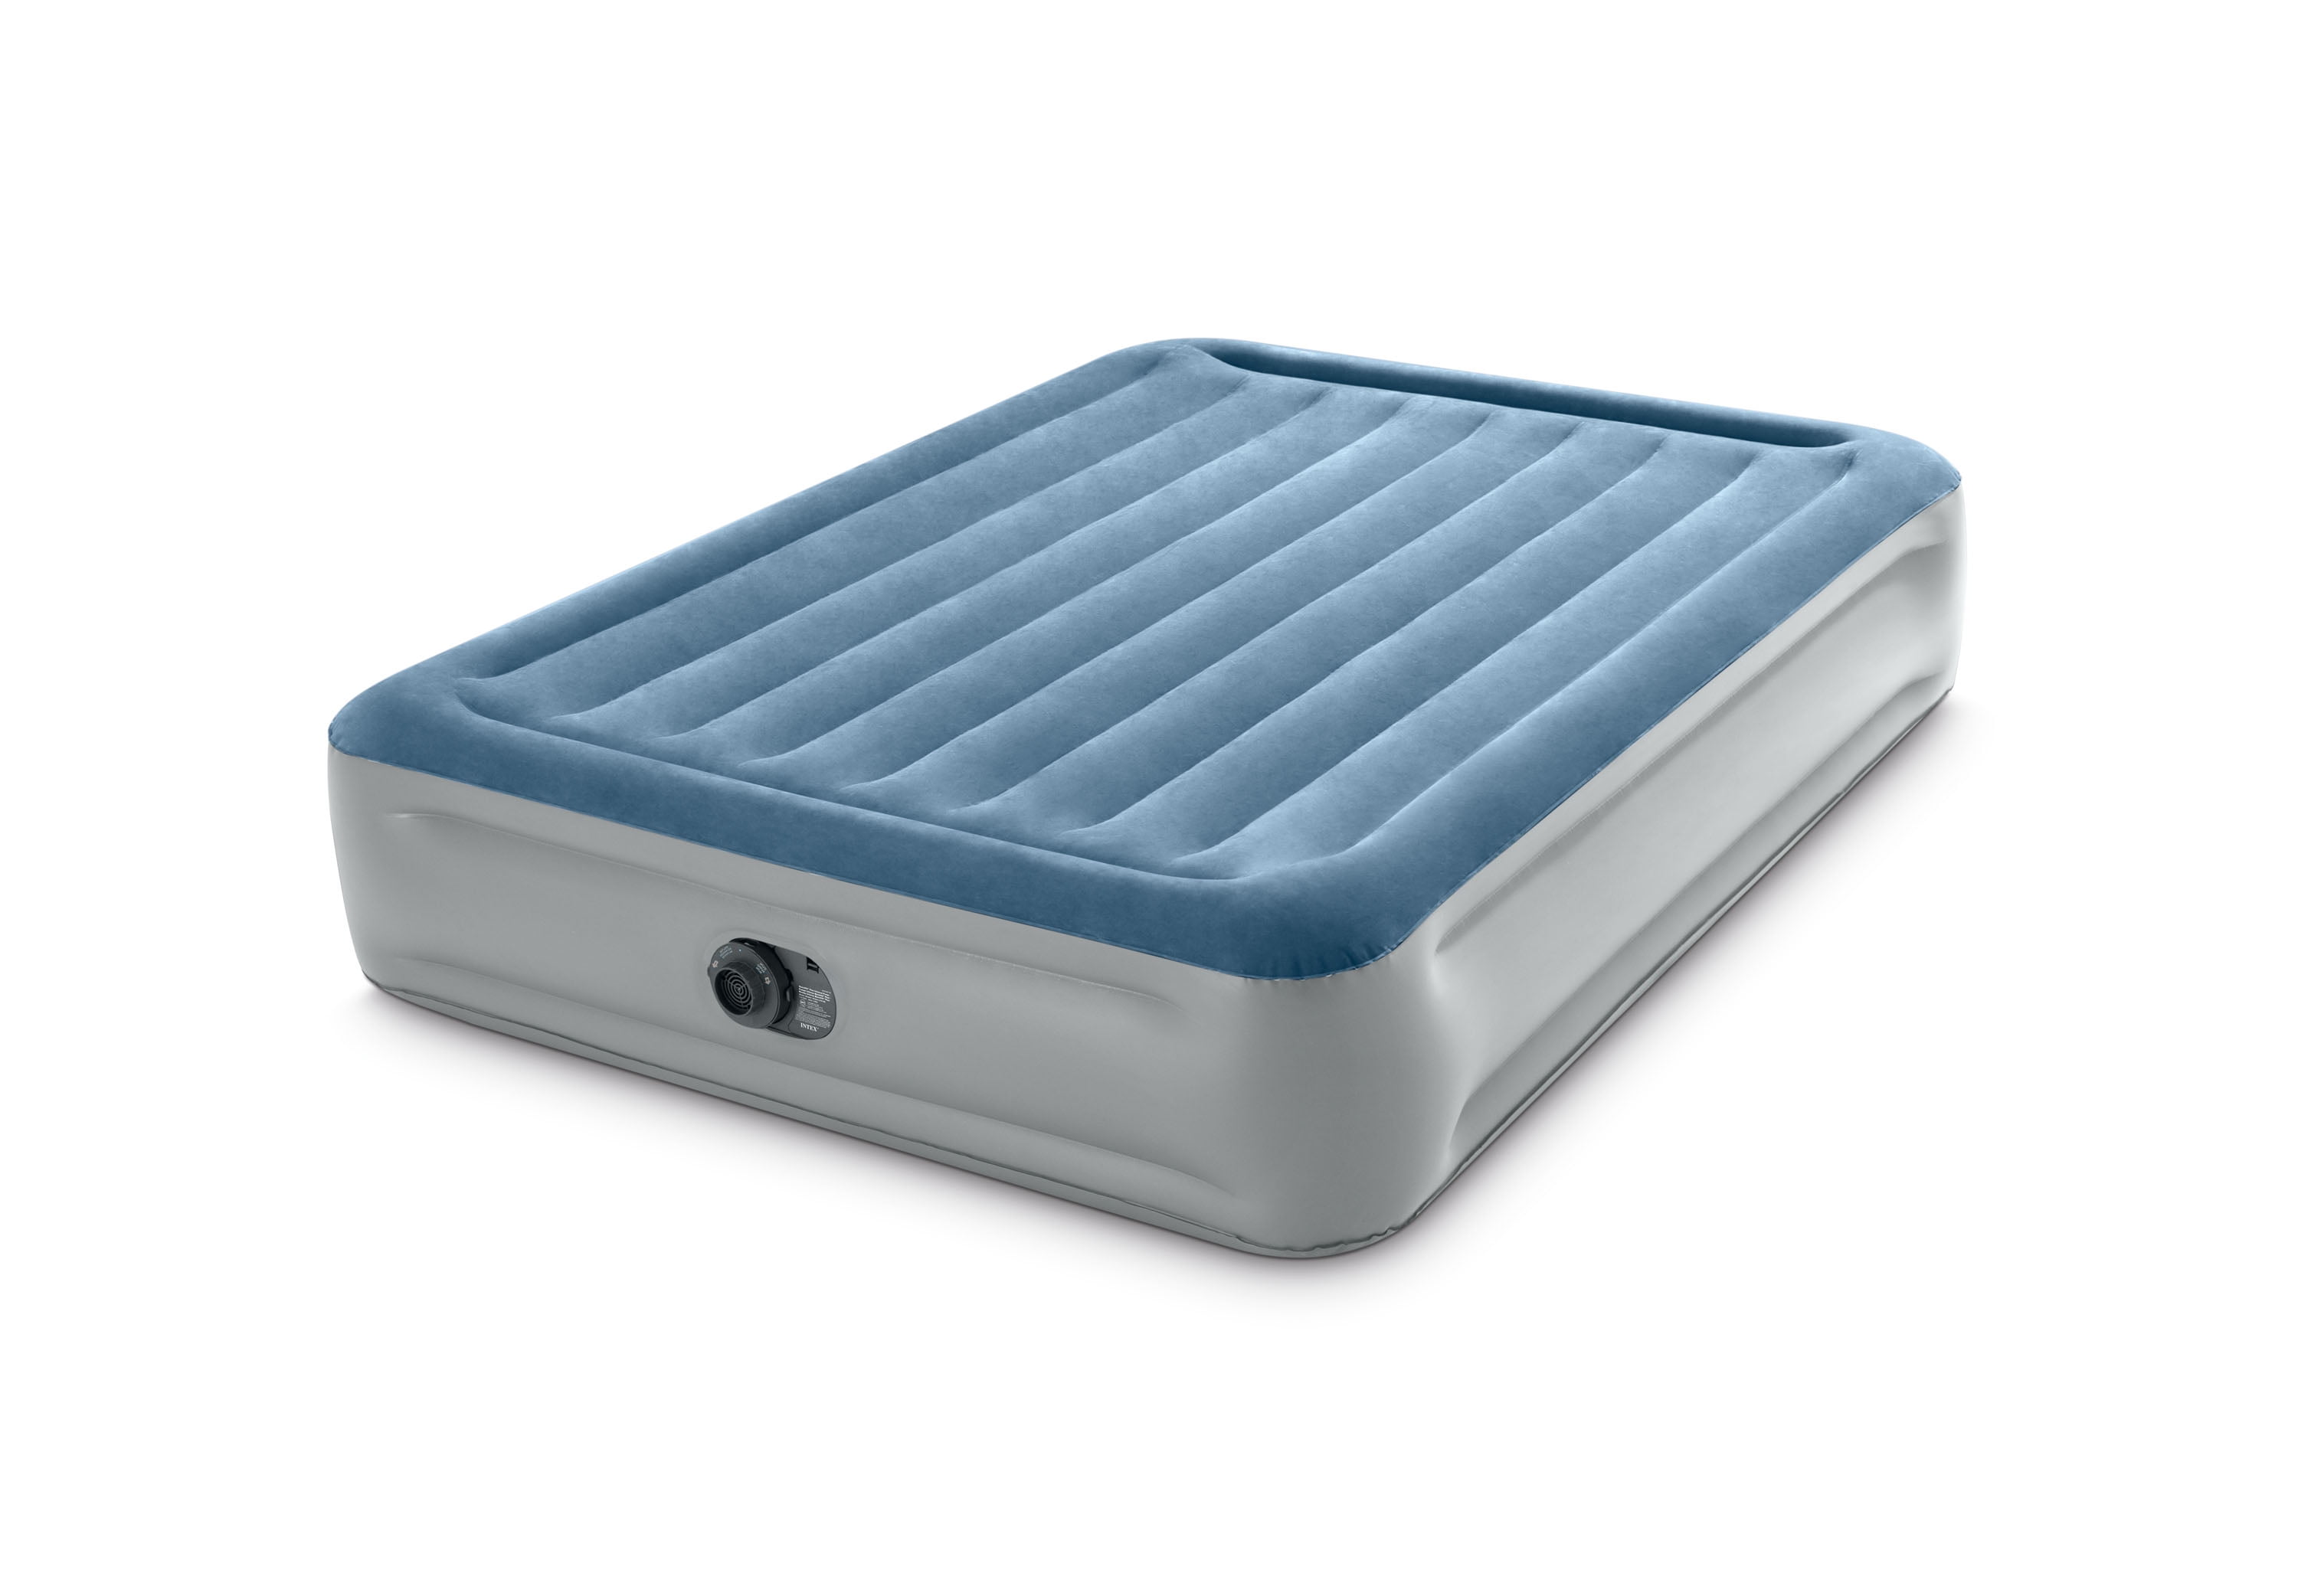 Intex 15 Essential Rest Dura-Beam Airbed Mattress with Internal Pump  included - FULL